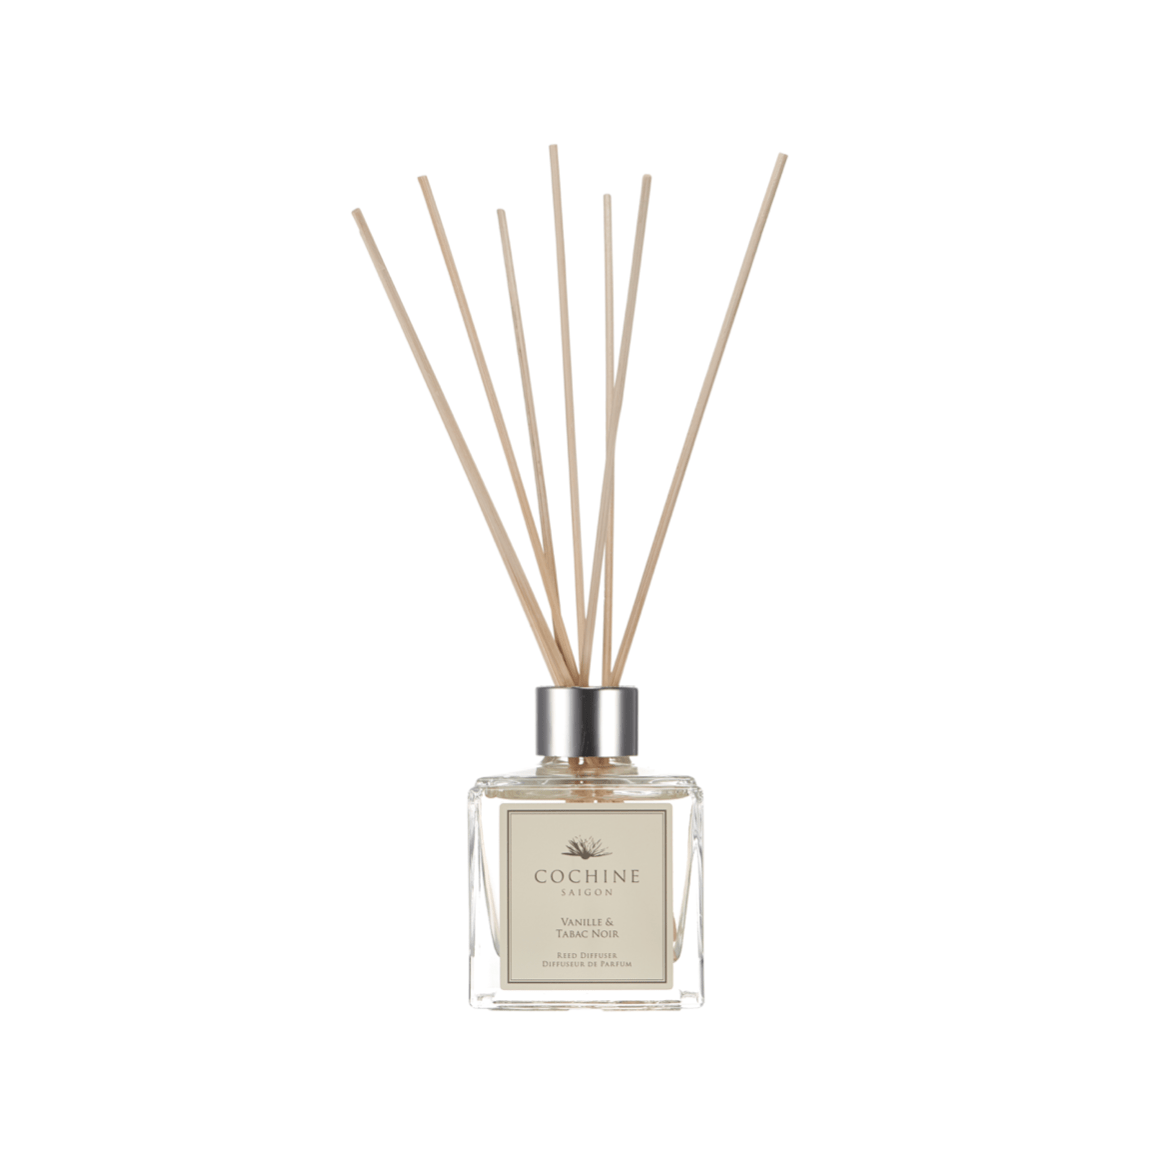 Cochine Home Fragrances of Cochines luxury scented candles and Cochine reed diffuers in Cochine Vanille & Tabac Noir Diffuser